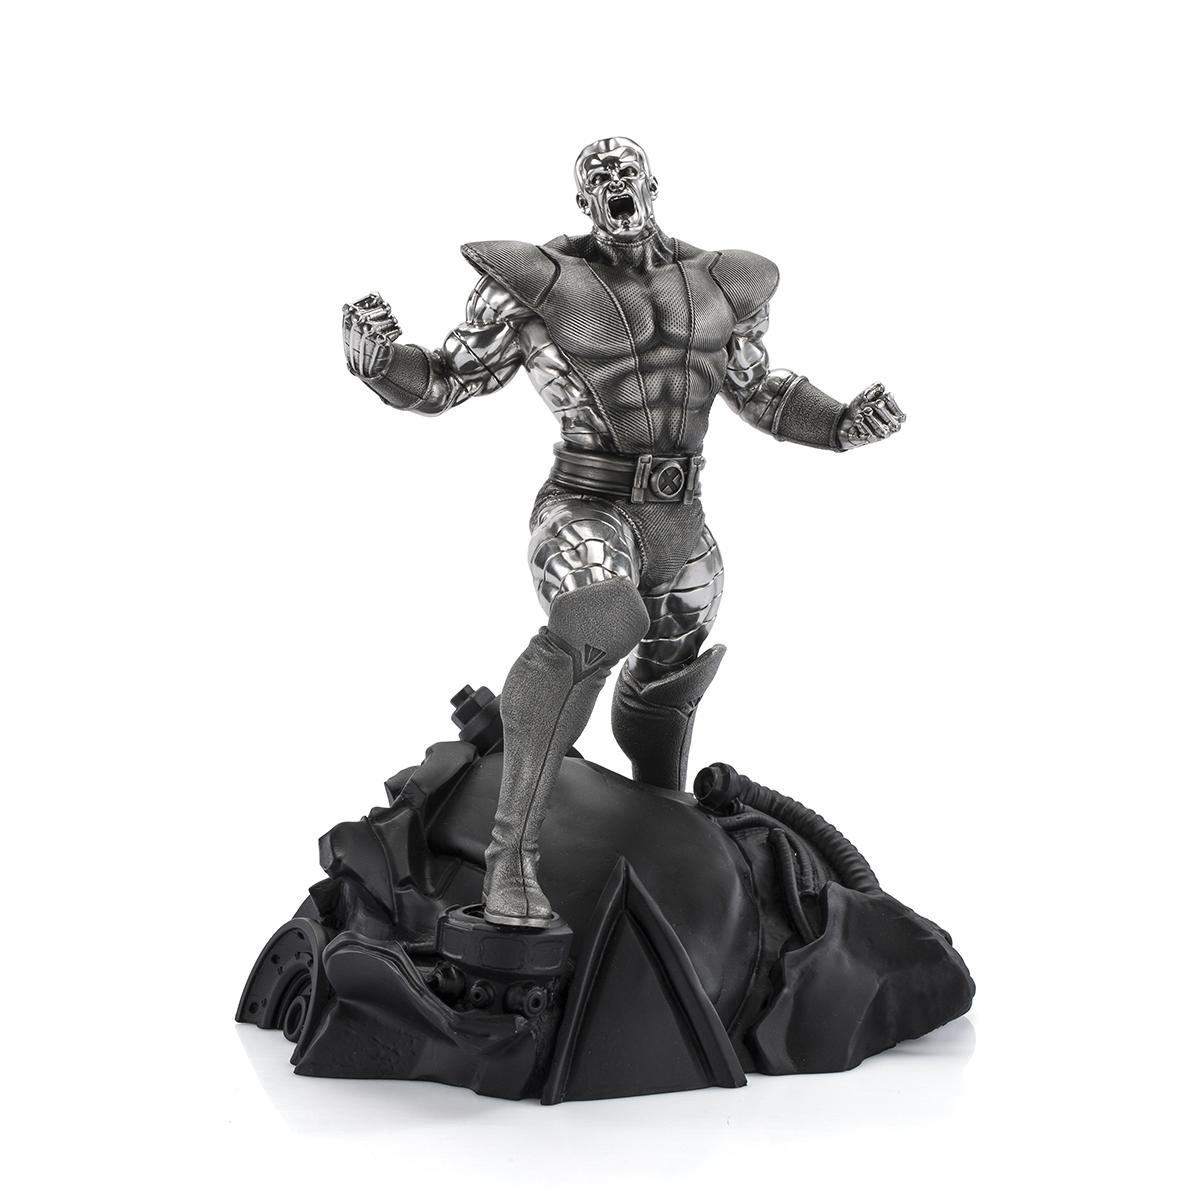 Limited Edition Colossus Victorious Figurine Royal Selangor Marvel Collection